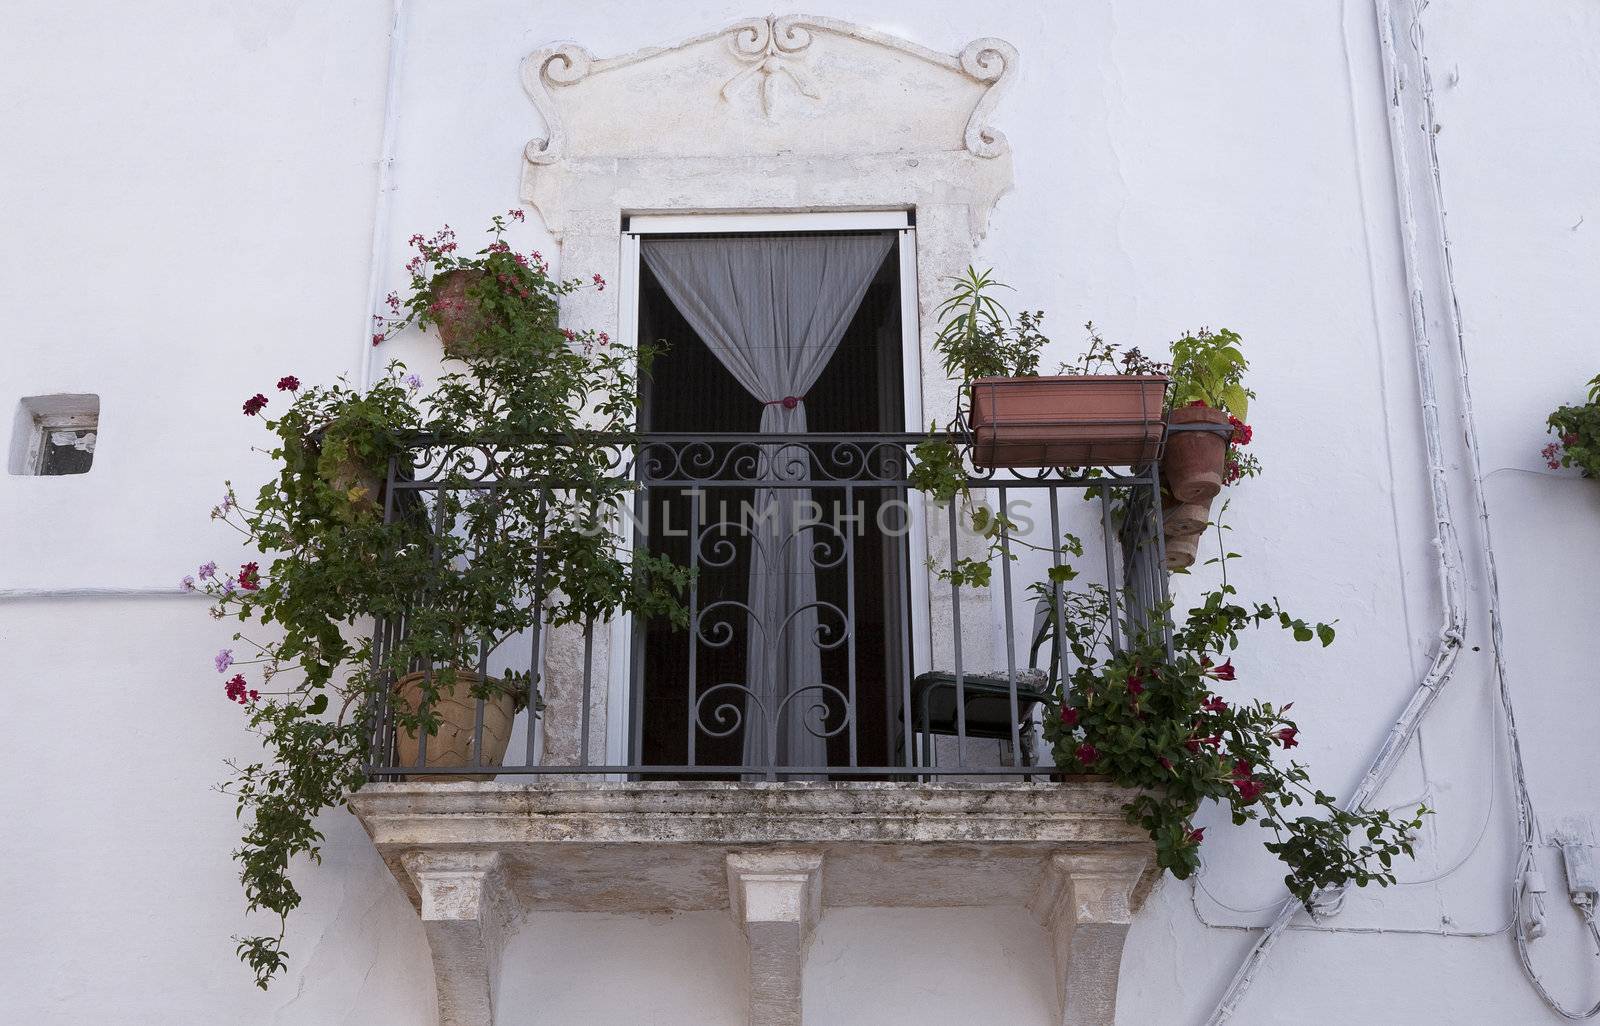 Nice balcony in the old part of Ostuni the province of Brindisi, Puglia, Italy. A city with a population of 32.000 inhabitants located about 8 km from the coast.